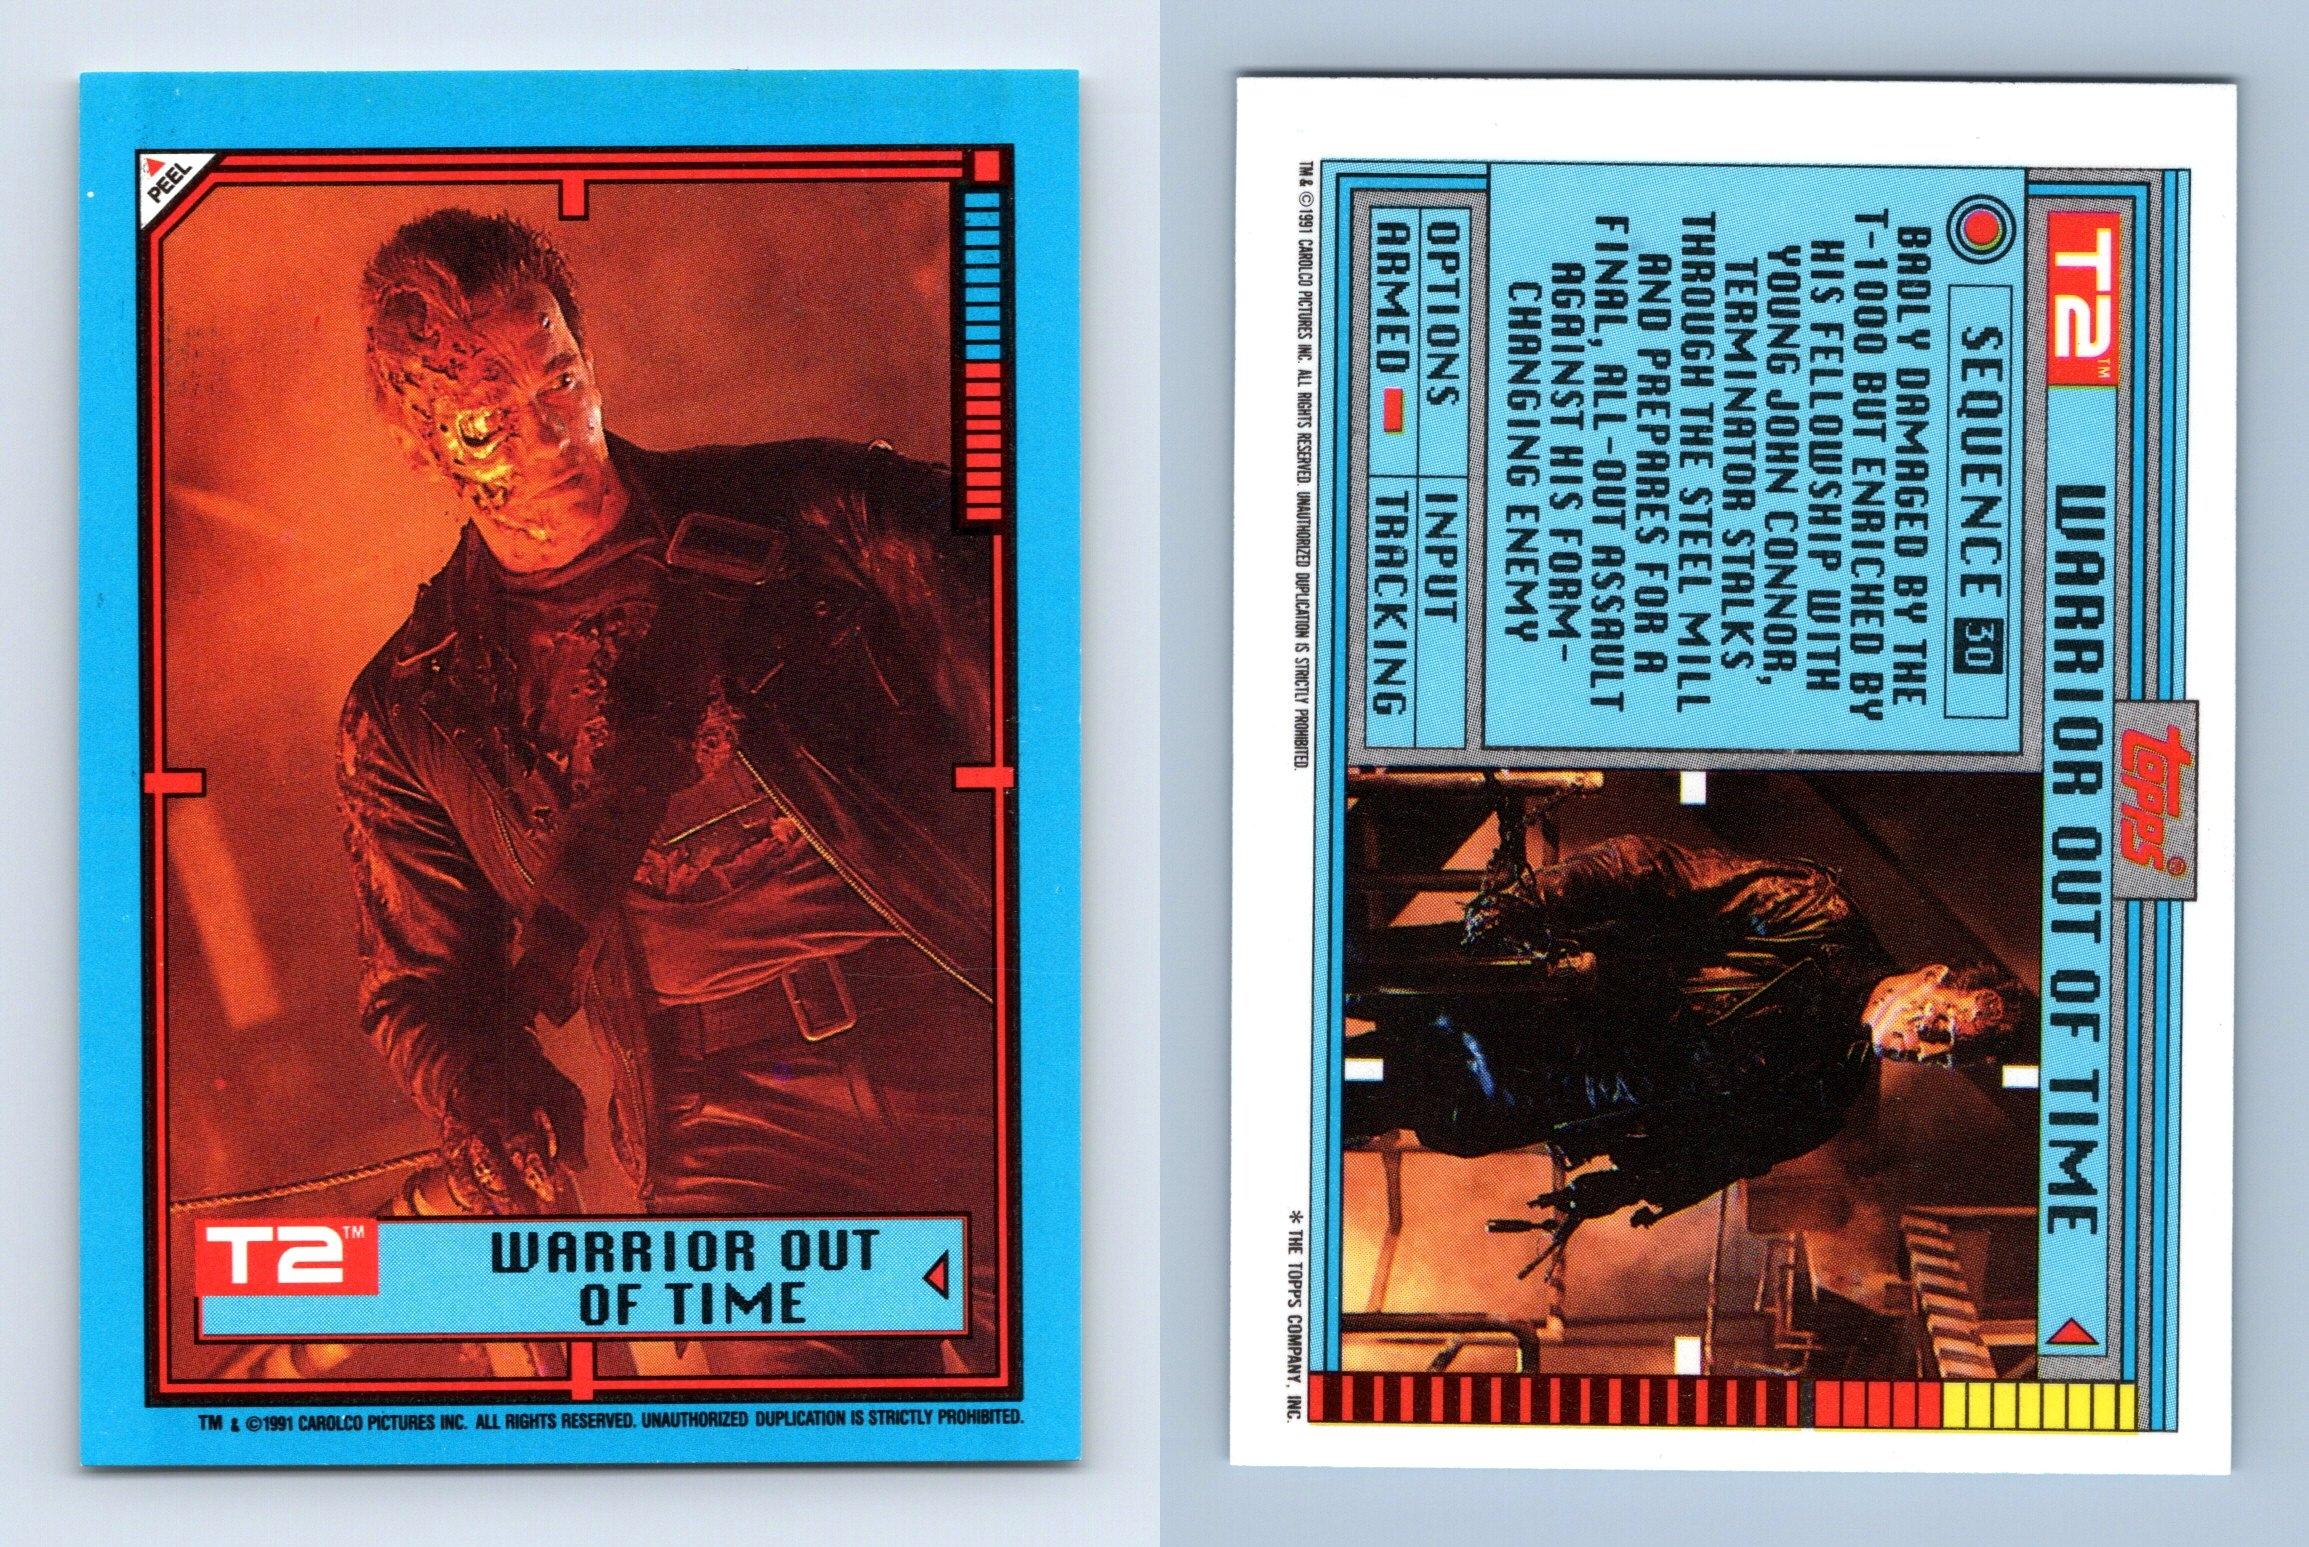 Warrior Out Of Time #30 T2 Terminator 2 Topps 1991 Large Trading Card / Sticker - Picture 1 of 1